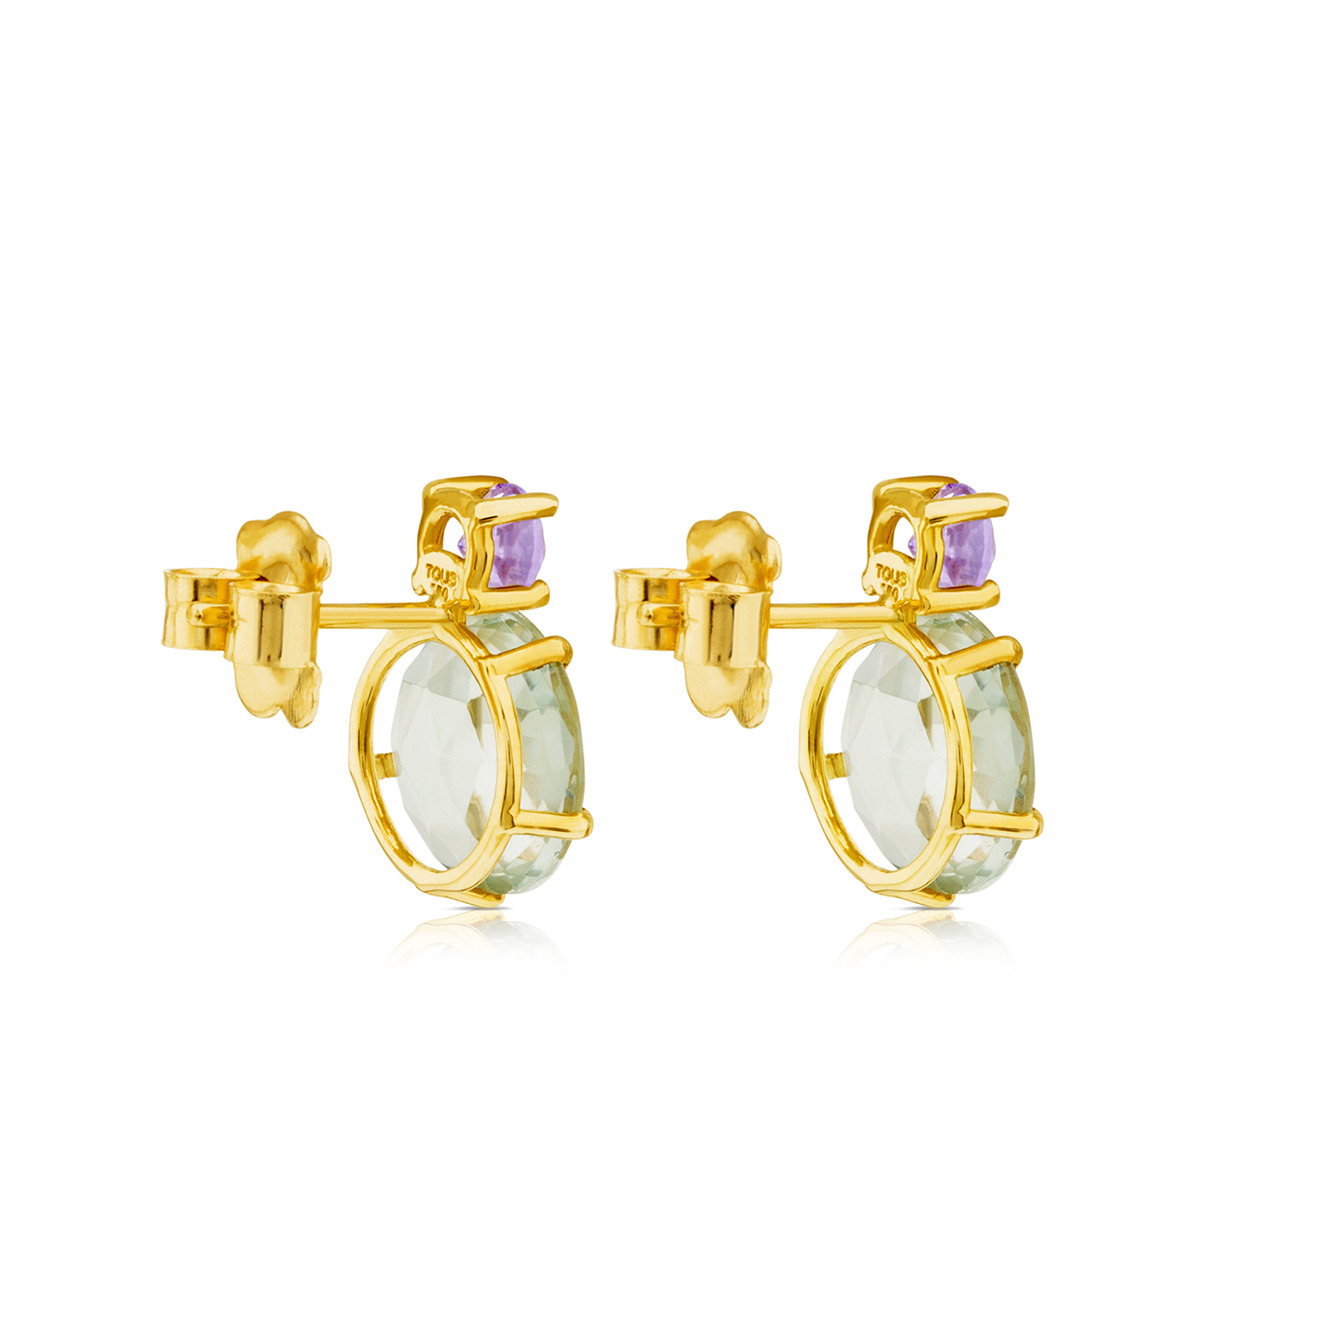 Ivette earrings in yellow gold with praseolite and amethyst – buy at Poison  Drop online store, SKU